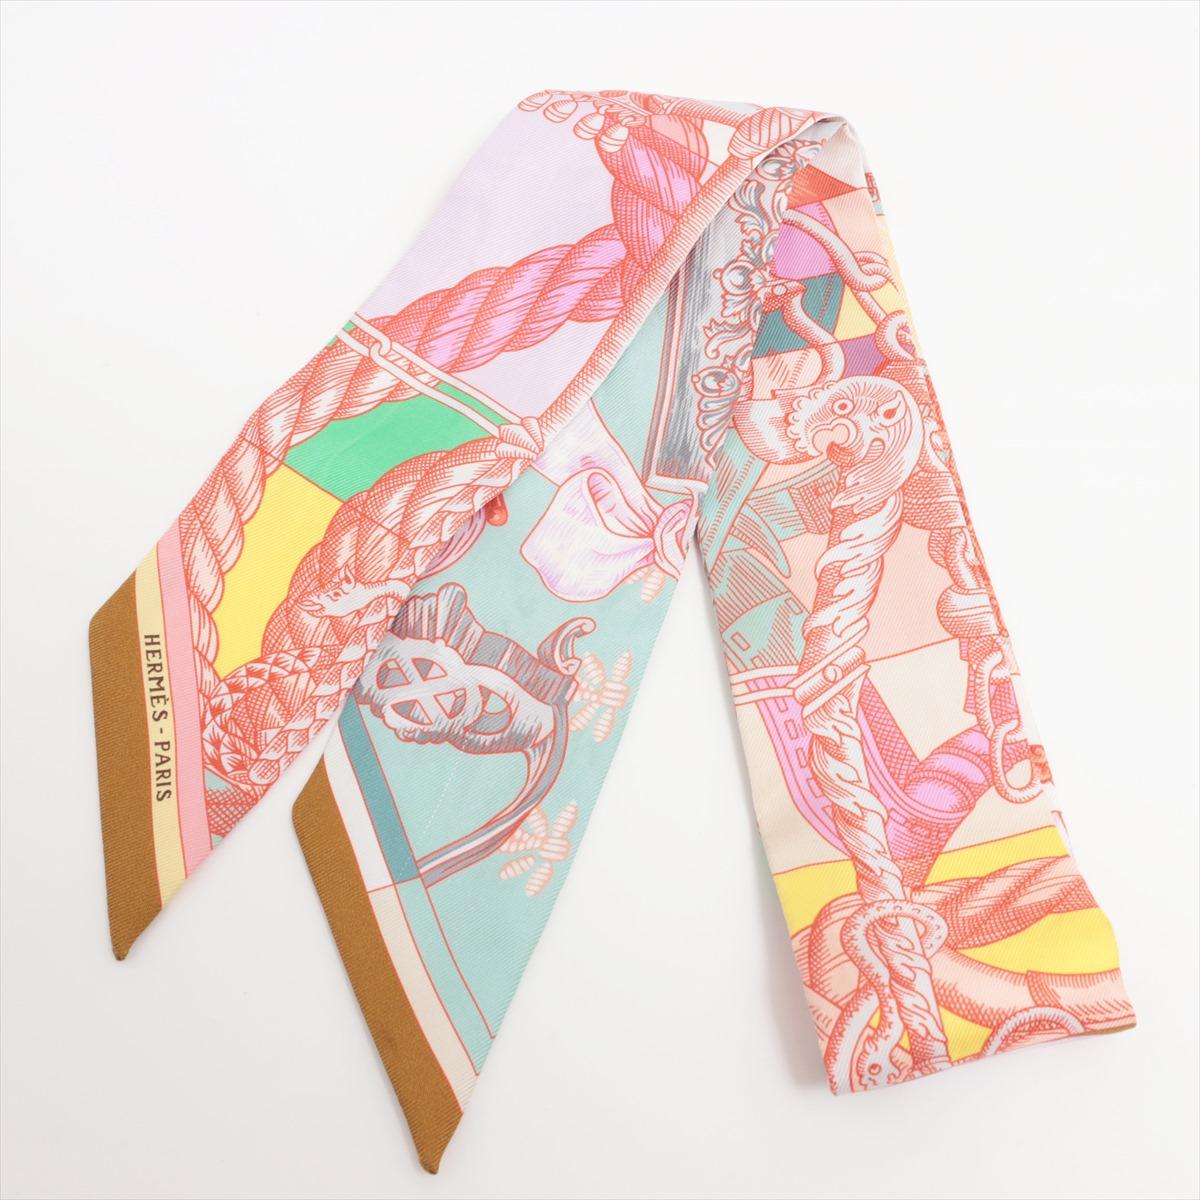 The Hermès Twilly Cavalleria d'Etriers in Pink is a luxurious and versatile accessory that adds a touch of elegance to any ensemble. Crafted from high-quality silk twill, the Twilly scarf features a vibrant pink hue adorned with intricate